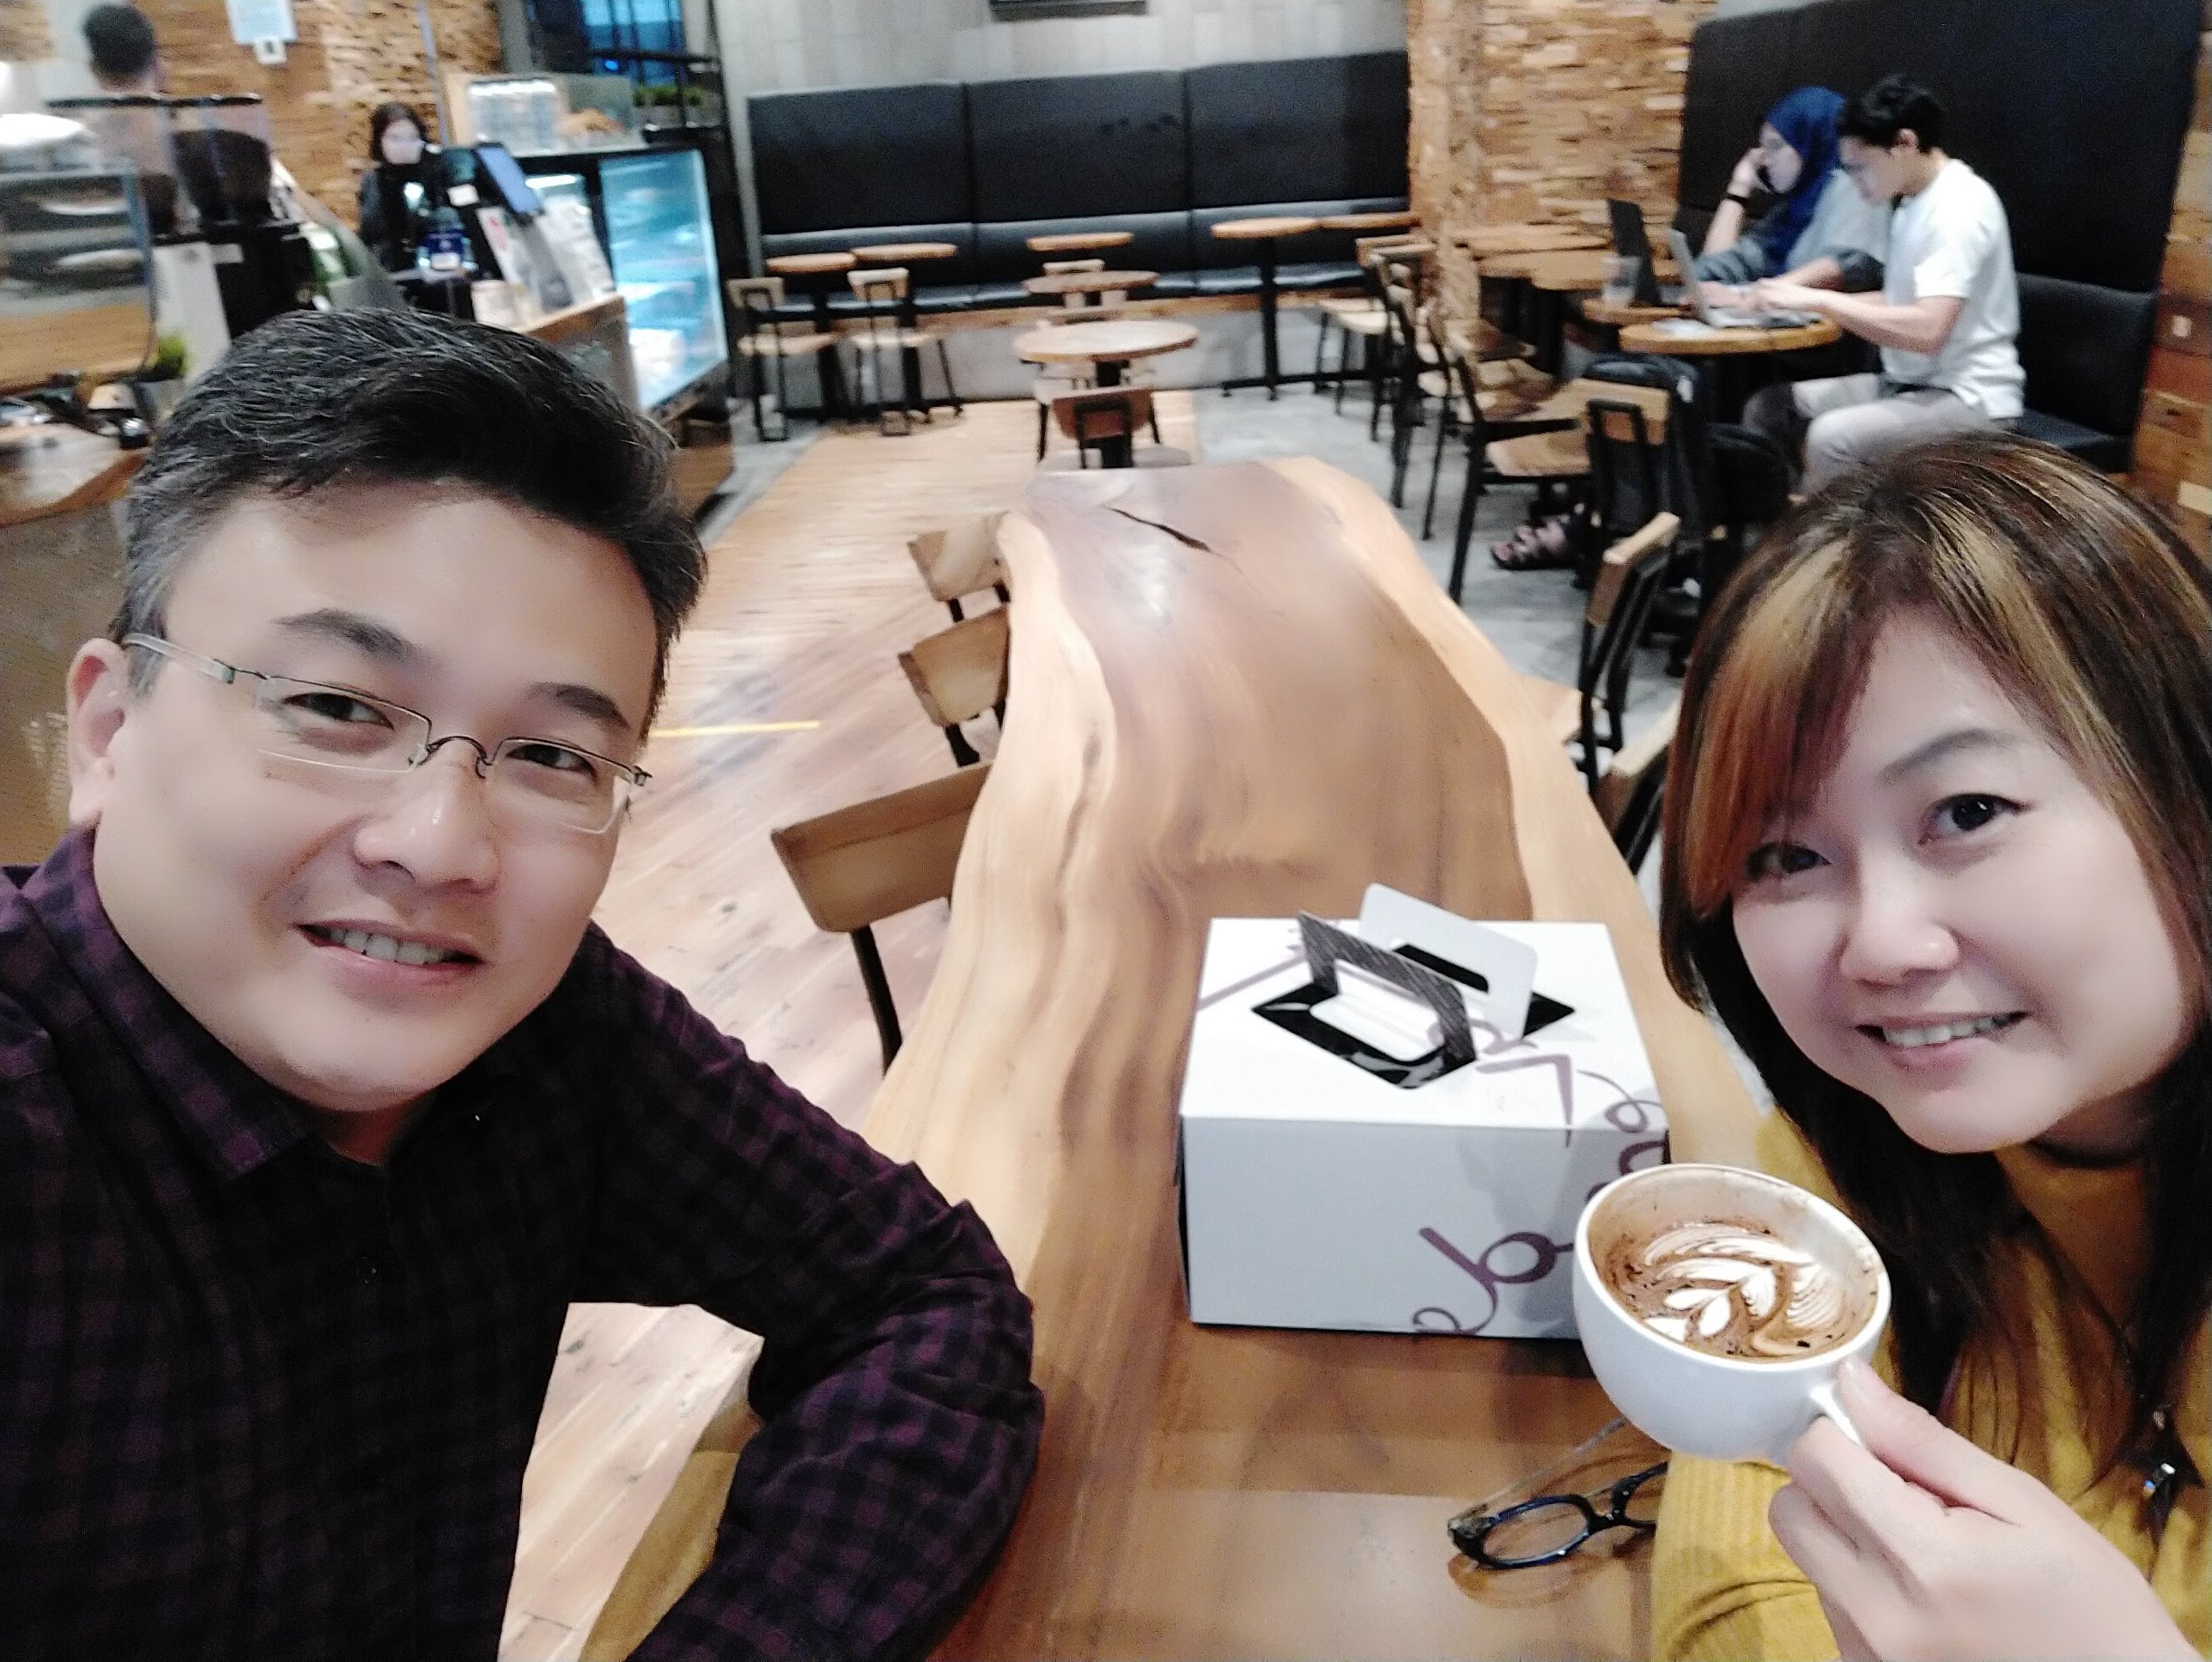 Coffee time with my wife Lea on my birthday this year.